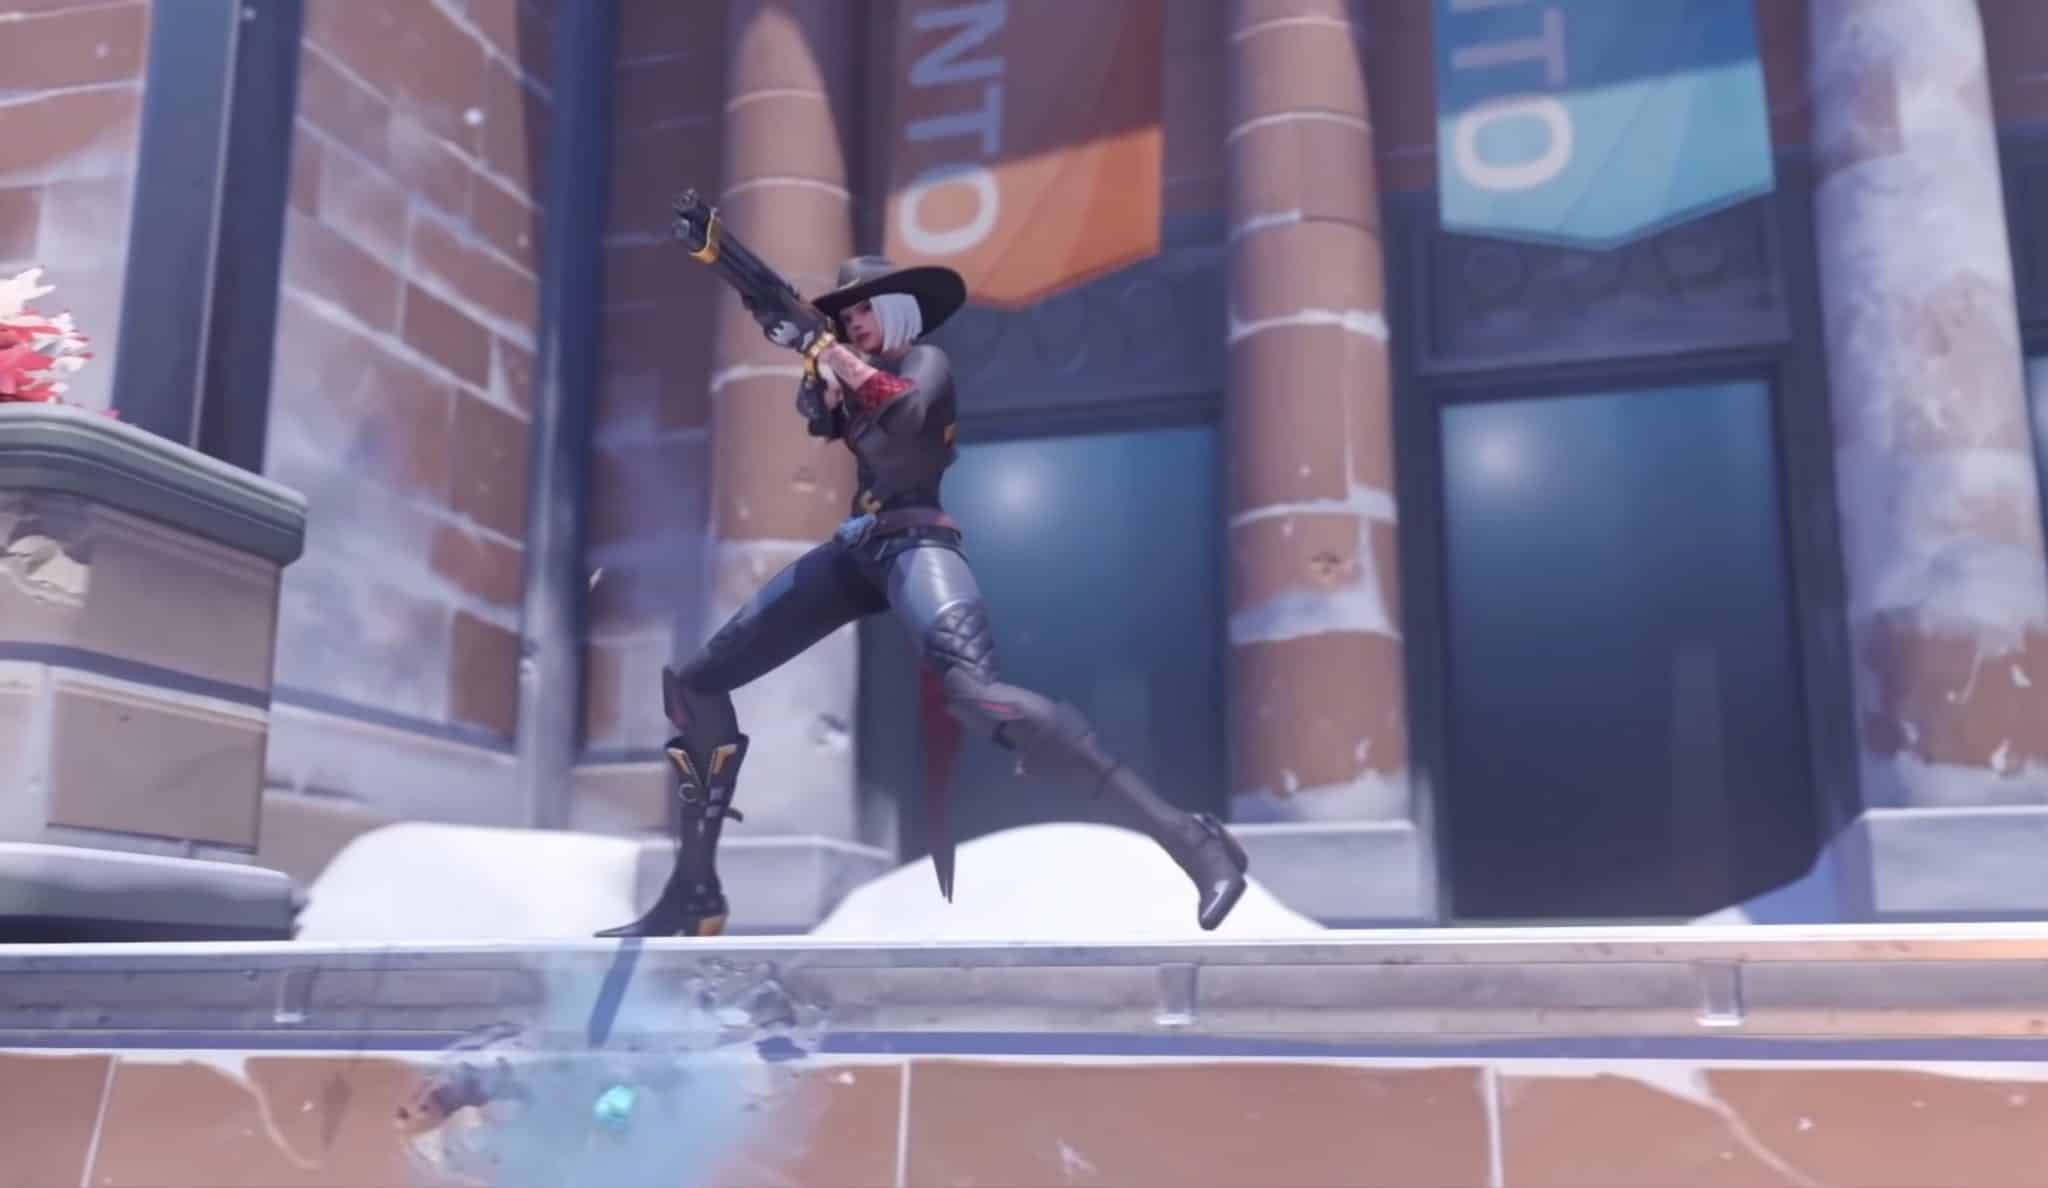 Ashe in Overwatch 2